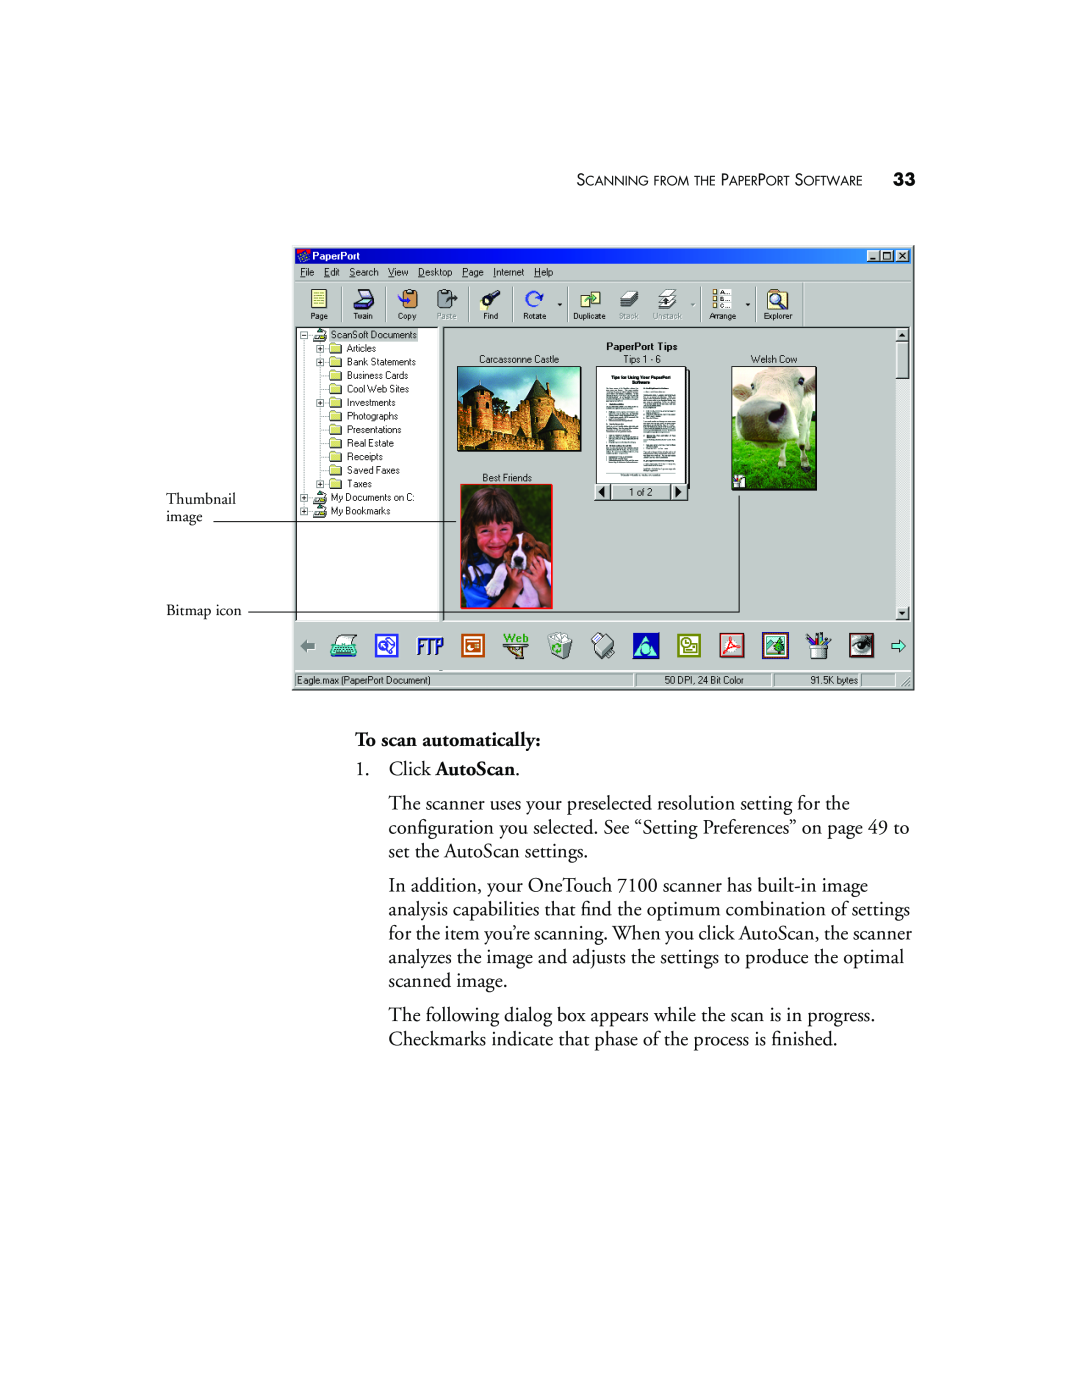 Visioneer 7100 manual To scan automatically 1. Click AutoScan, Thumbnail image Bitmap icon 